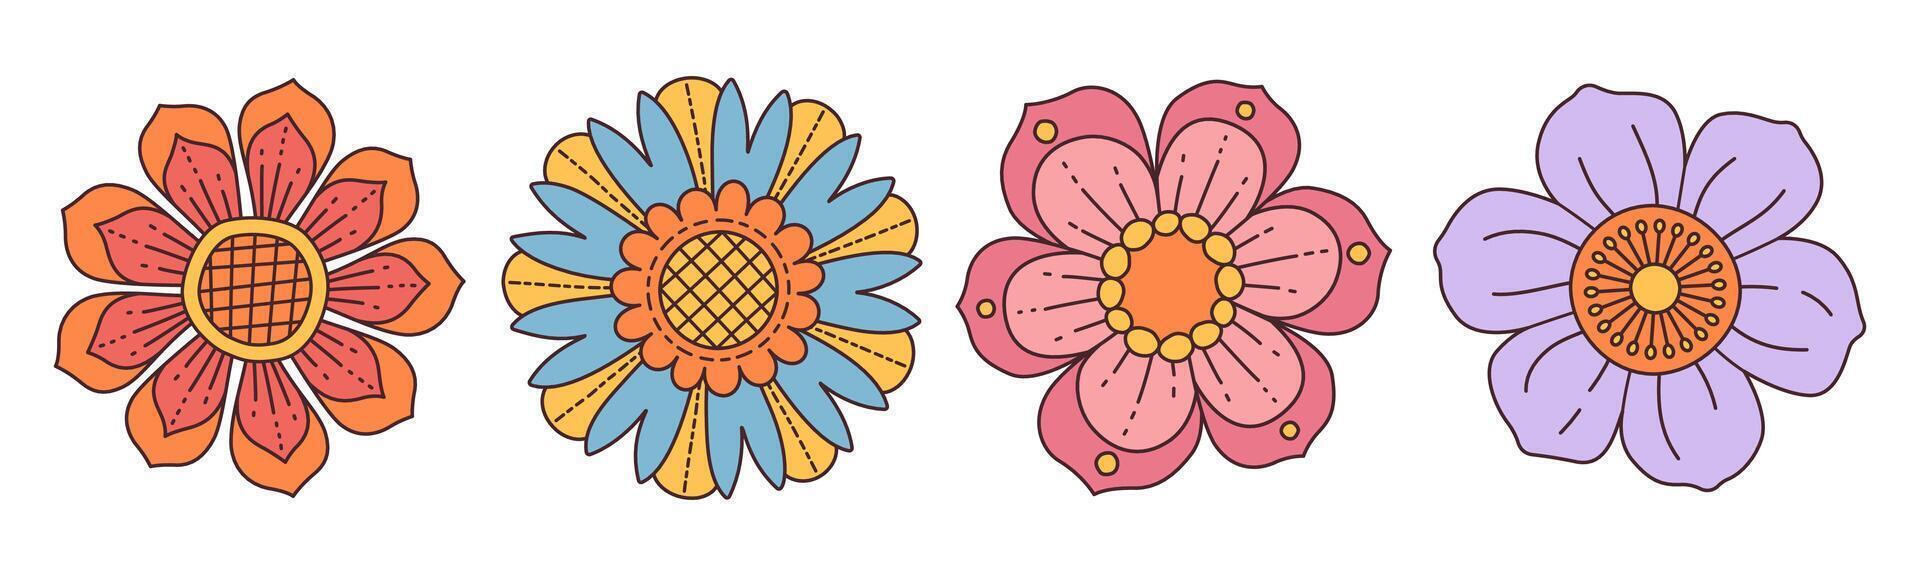 Collection of spring colorful flower. Set Trendy groovy wildflower 70s Vintage style isolated on white. Hand drawn blossom doodle illustration. Bright colorful flowers. Retro floral design. vector